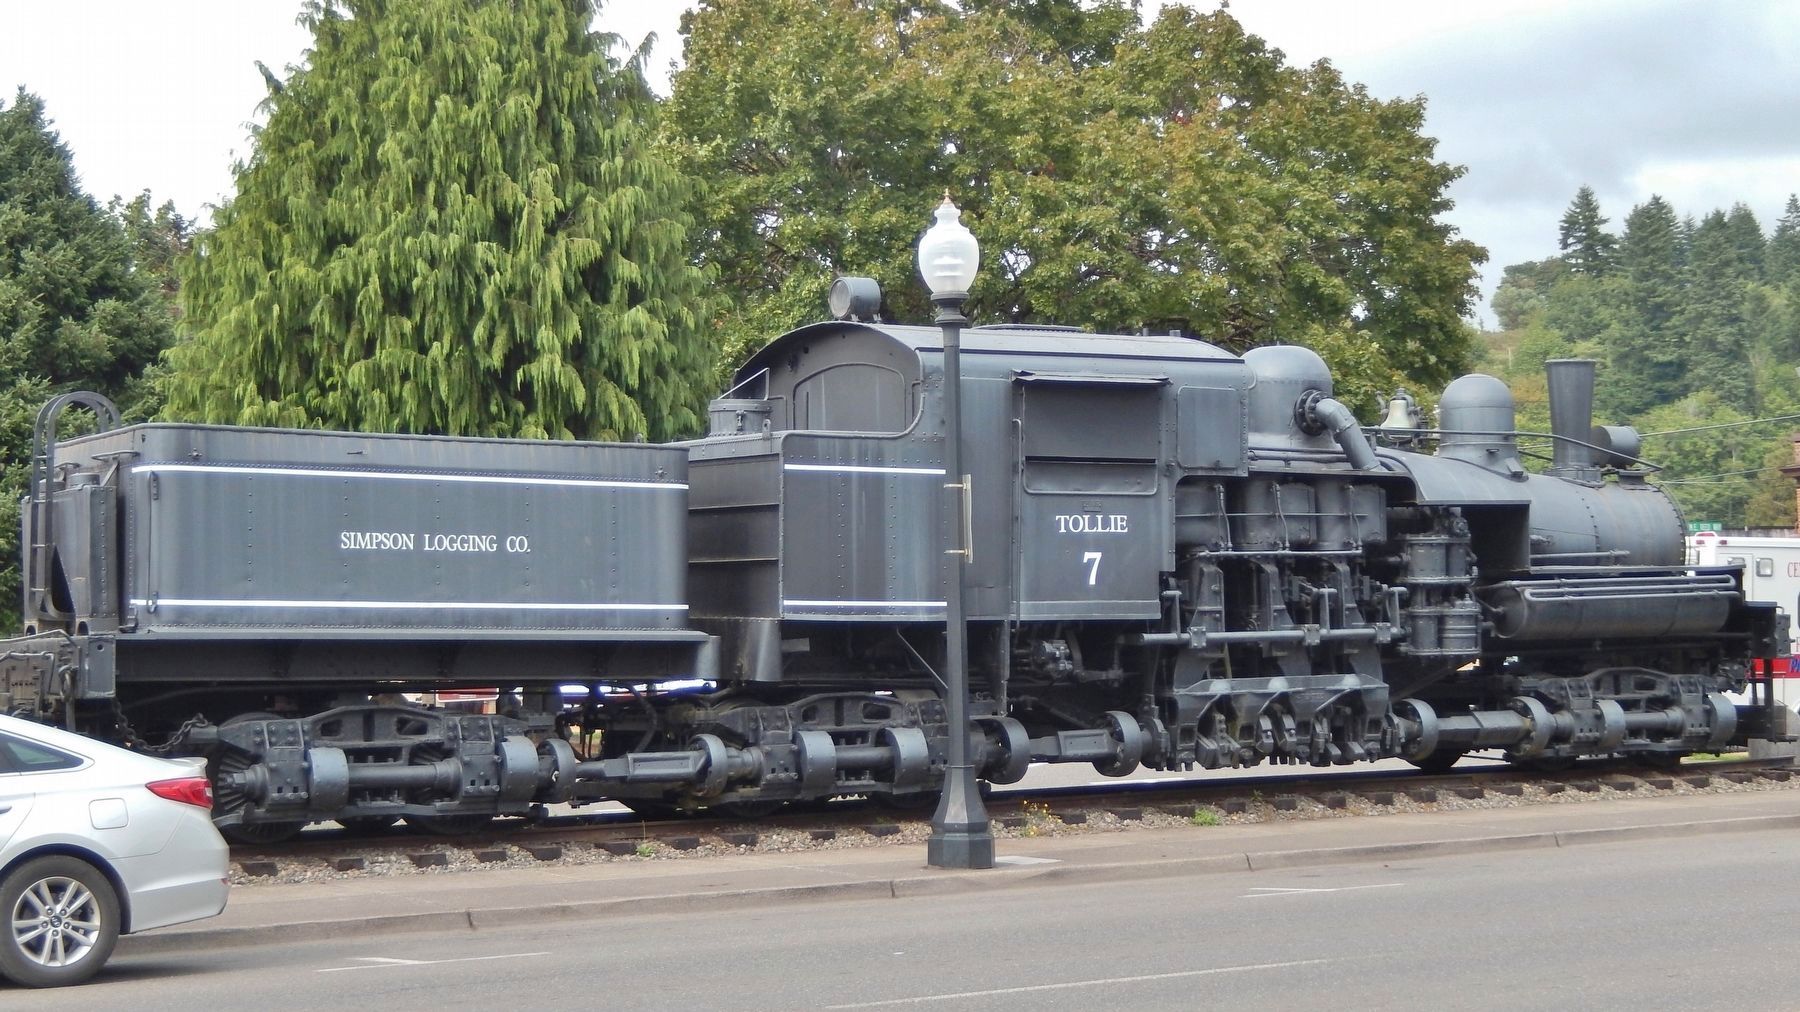 Simpson Logging Company Shay Locomotive #7 (<i>wide view</i>) image. Click for full size.